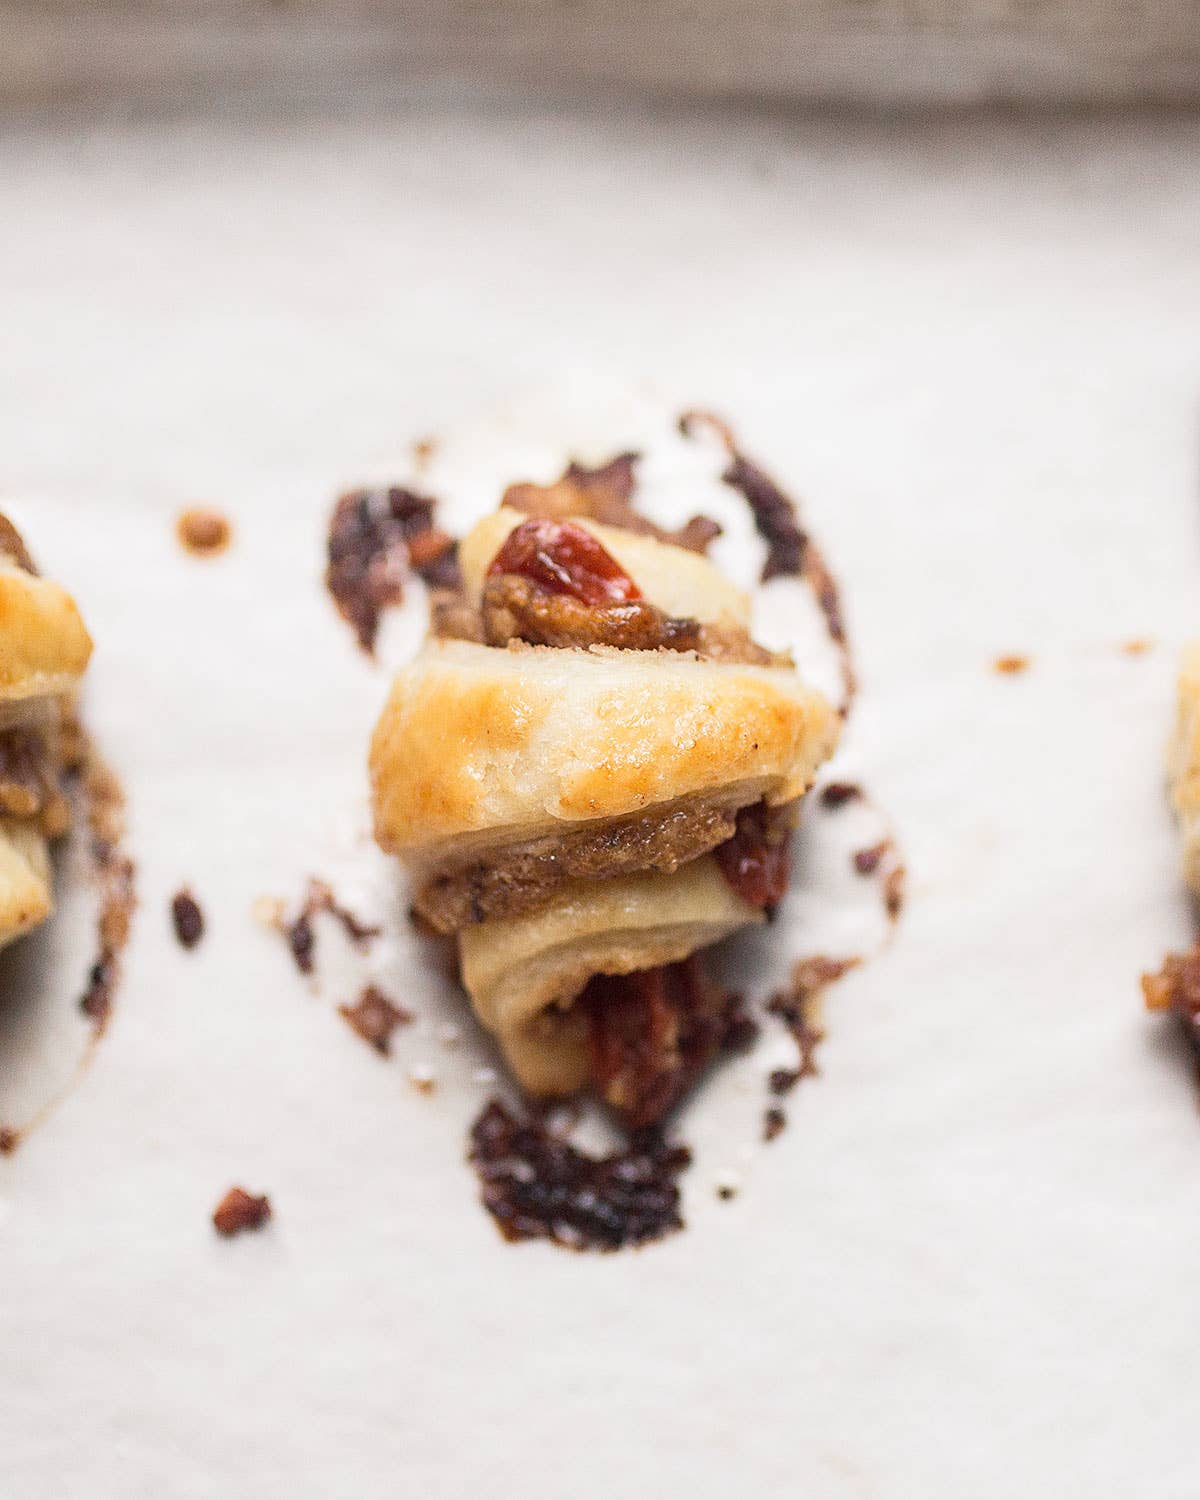 Give Your Hanukkah Rugelach a Chinese Spin